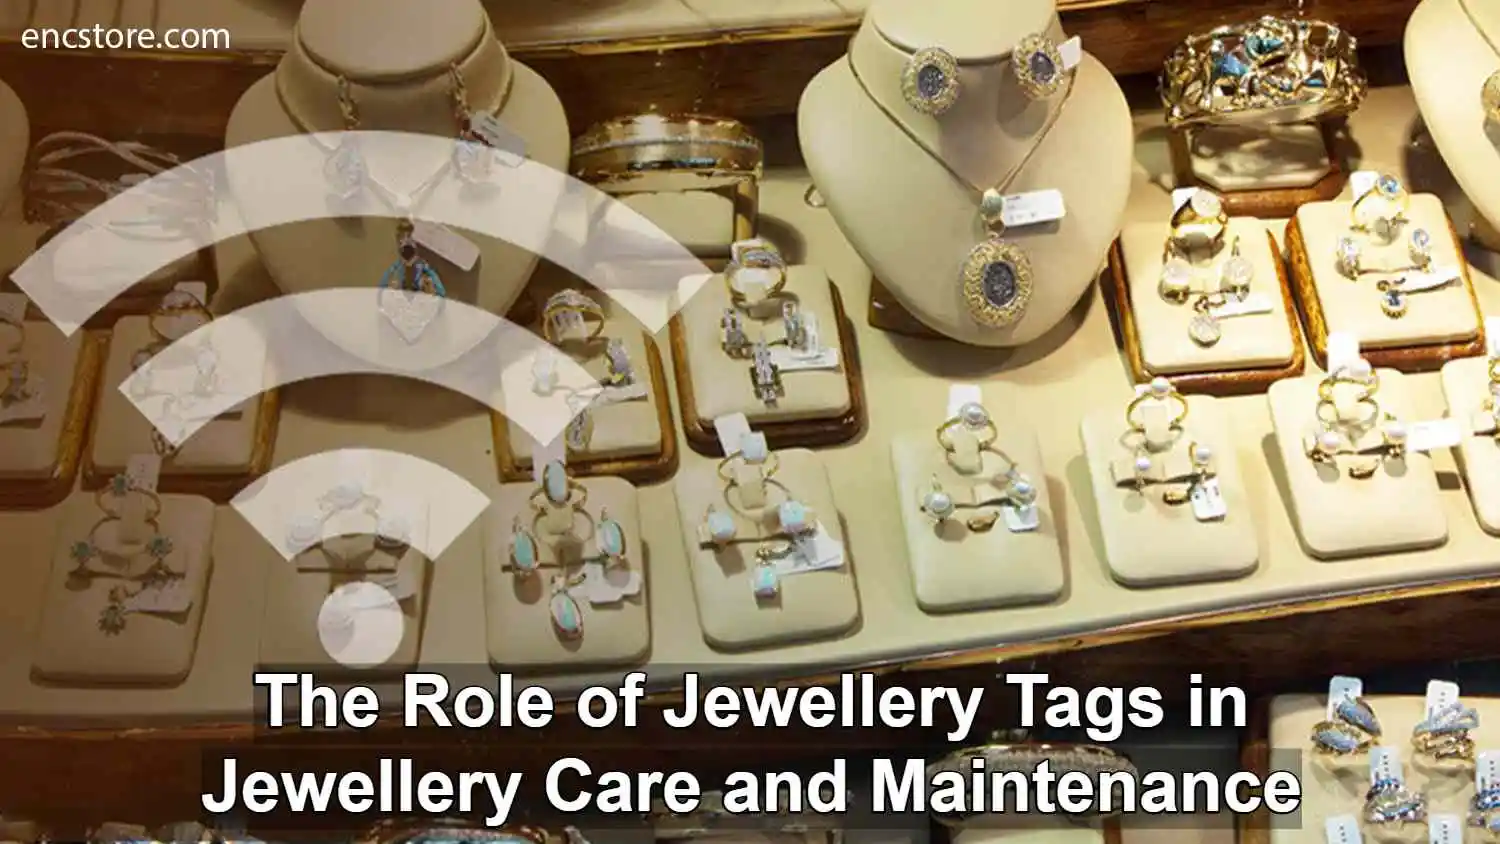 The Role of RFID Jewellery Tags in Jewellery Care and Maintenance